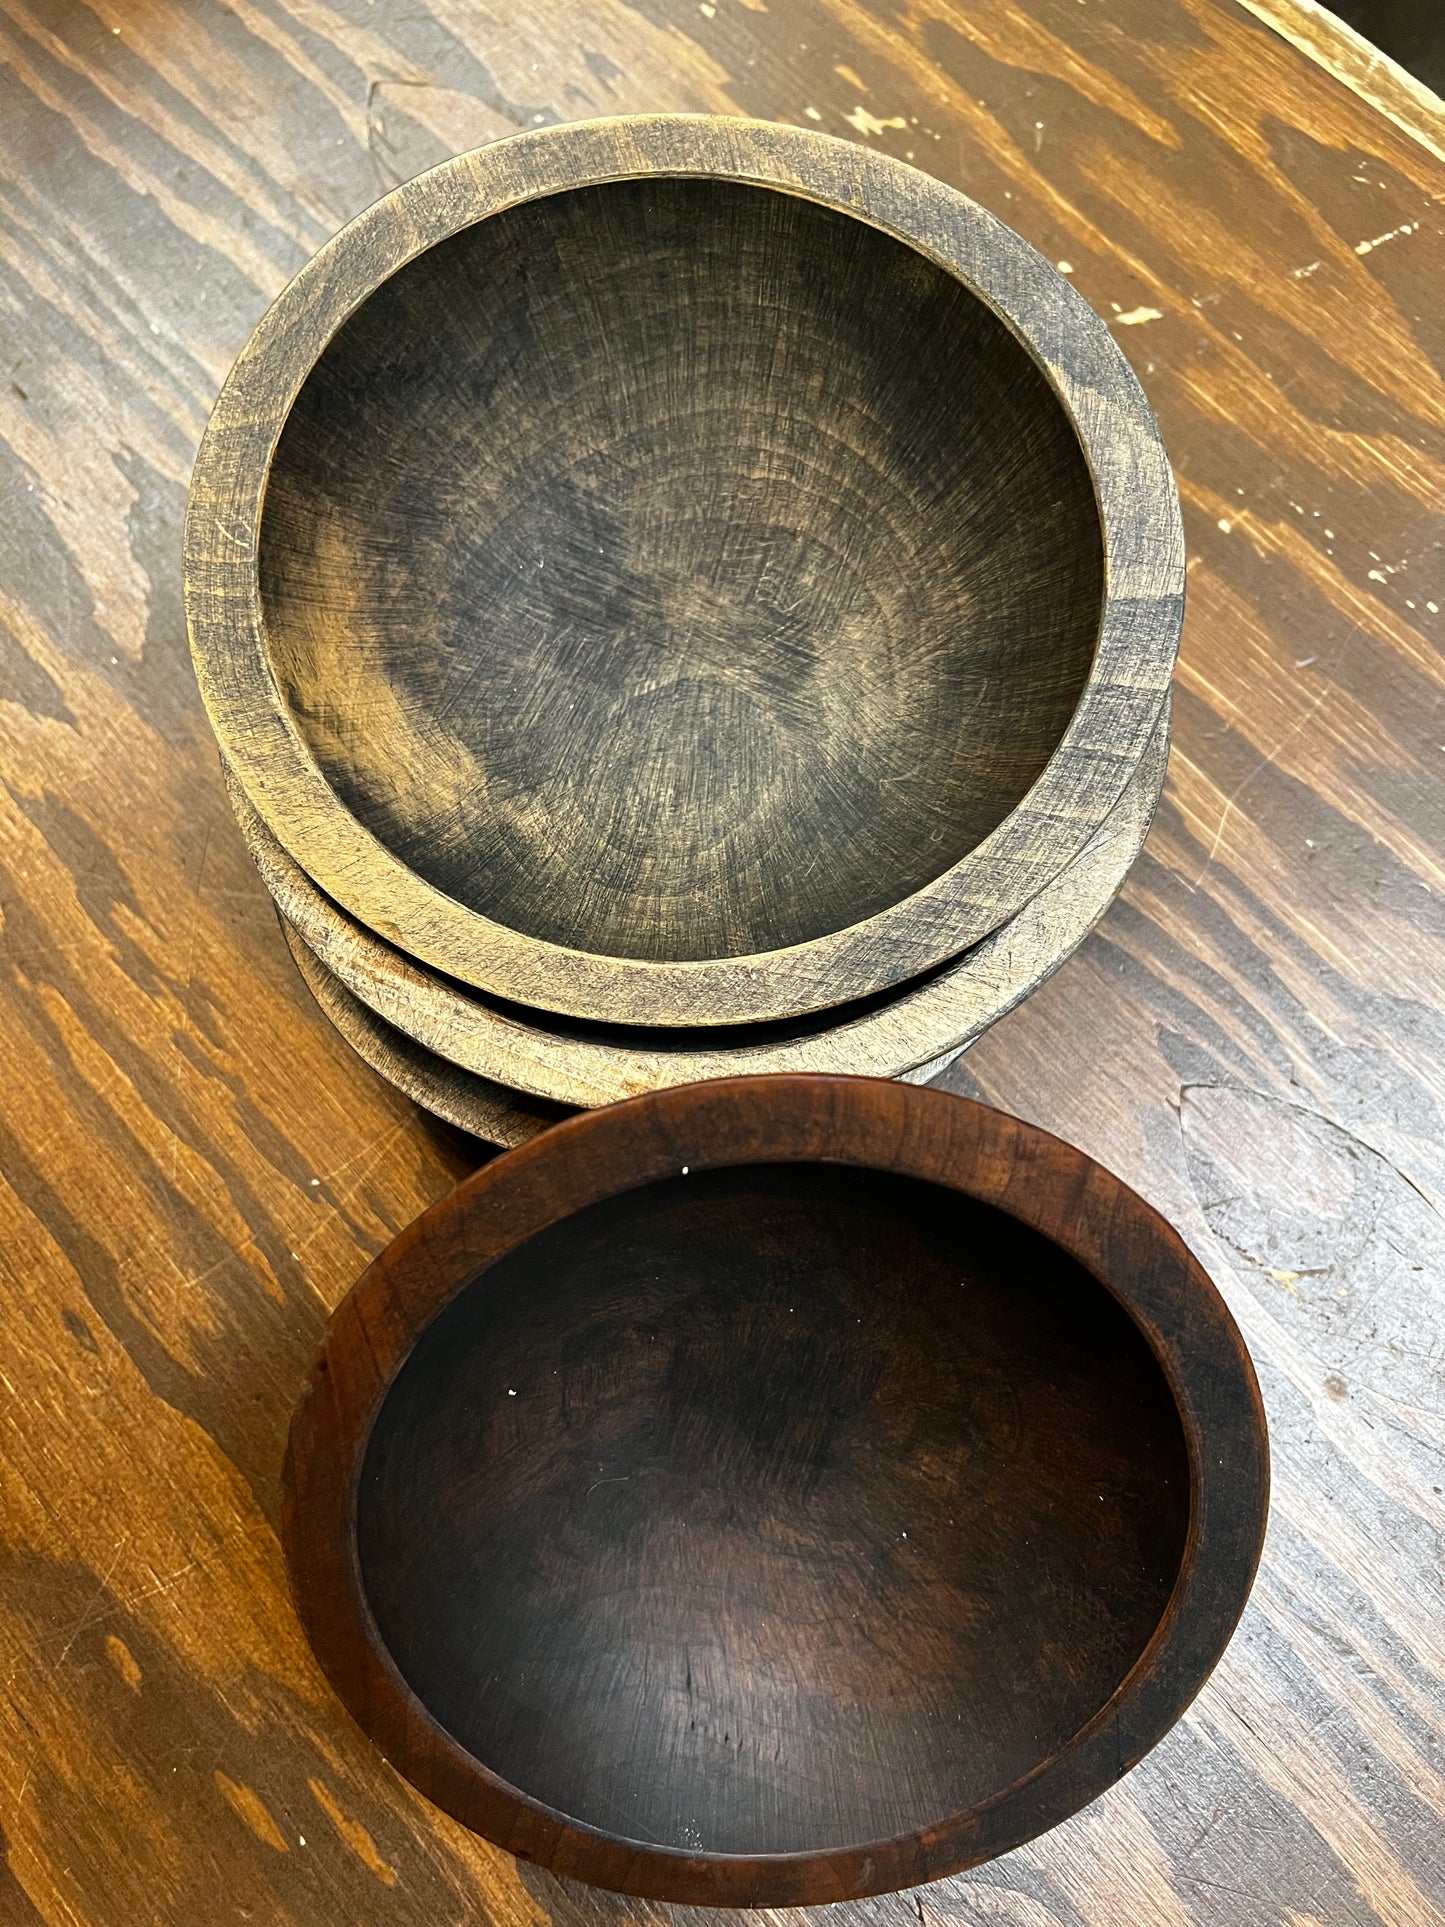 Wooden Bowl, 7.5” Round/Out of Round